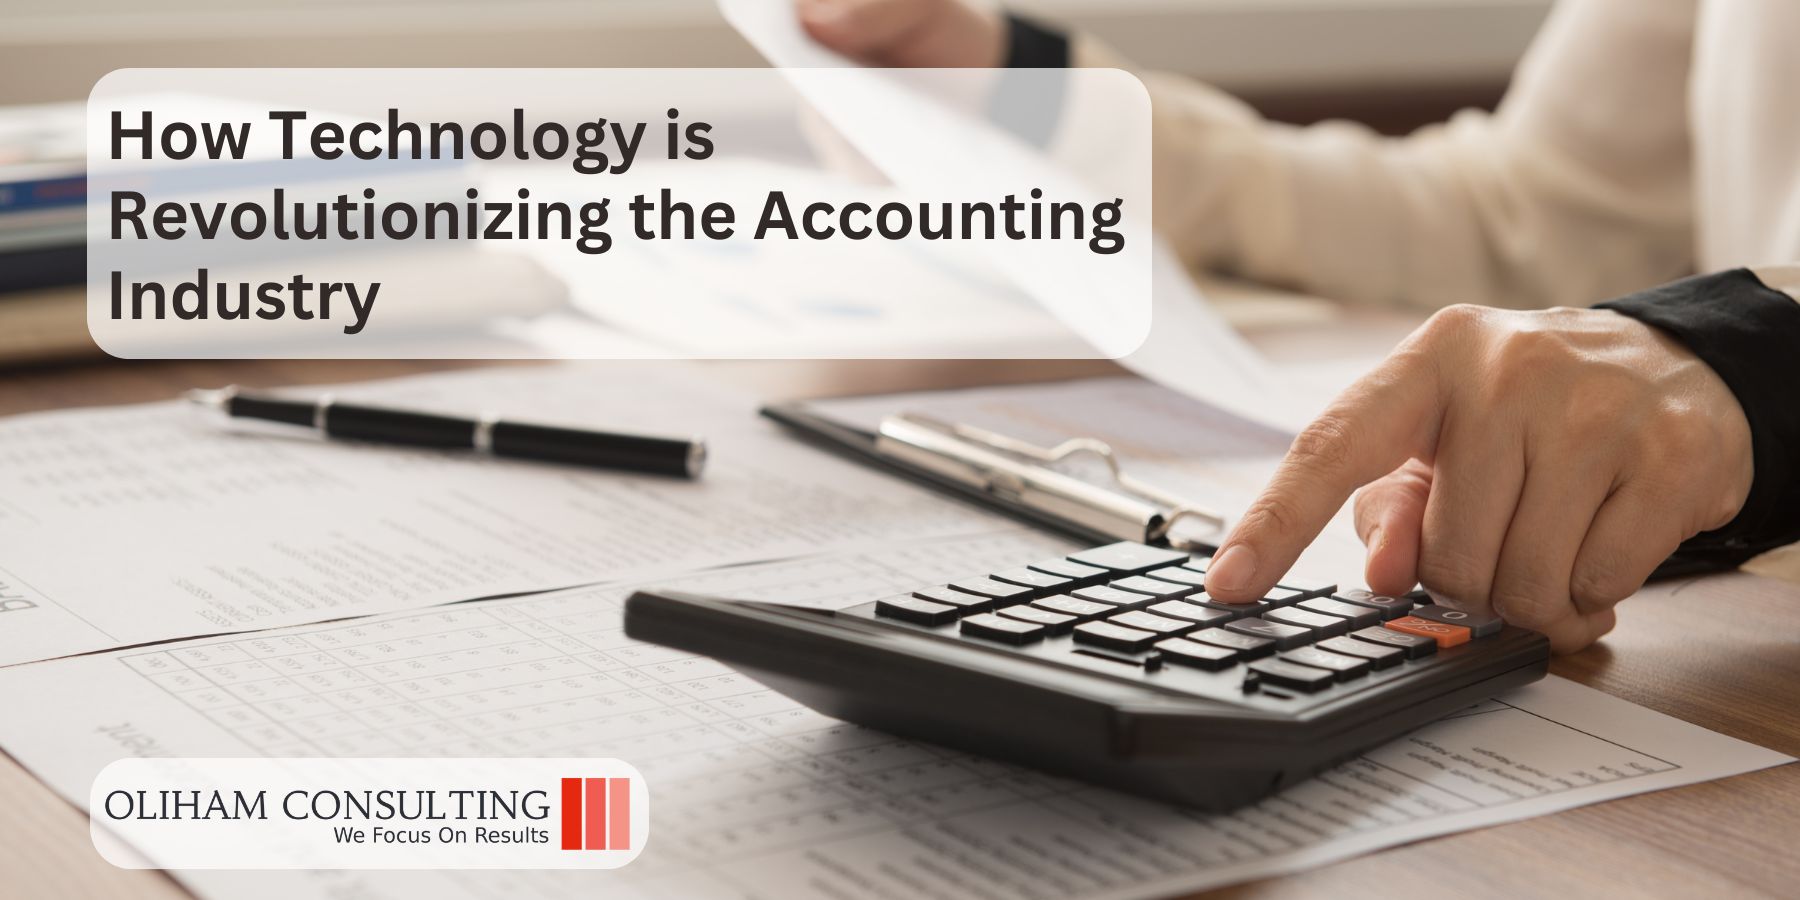 How Technology is Revolutionizing the Accounting Industry